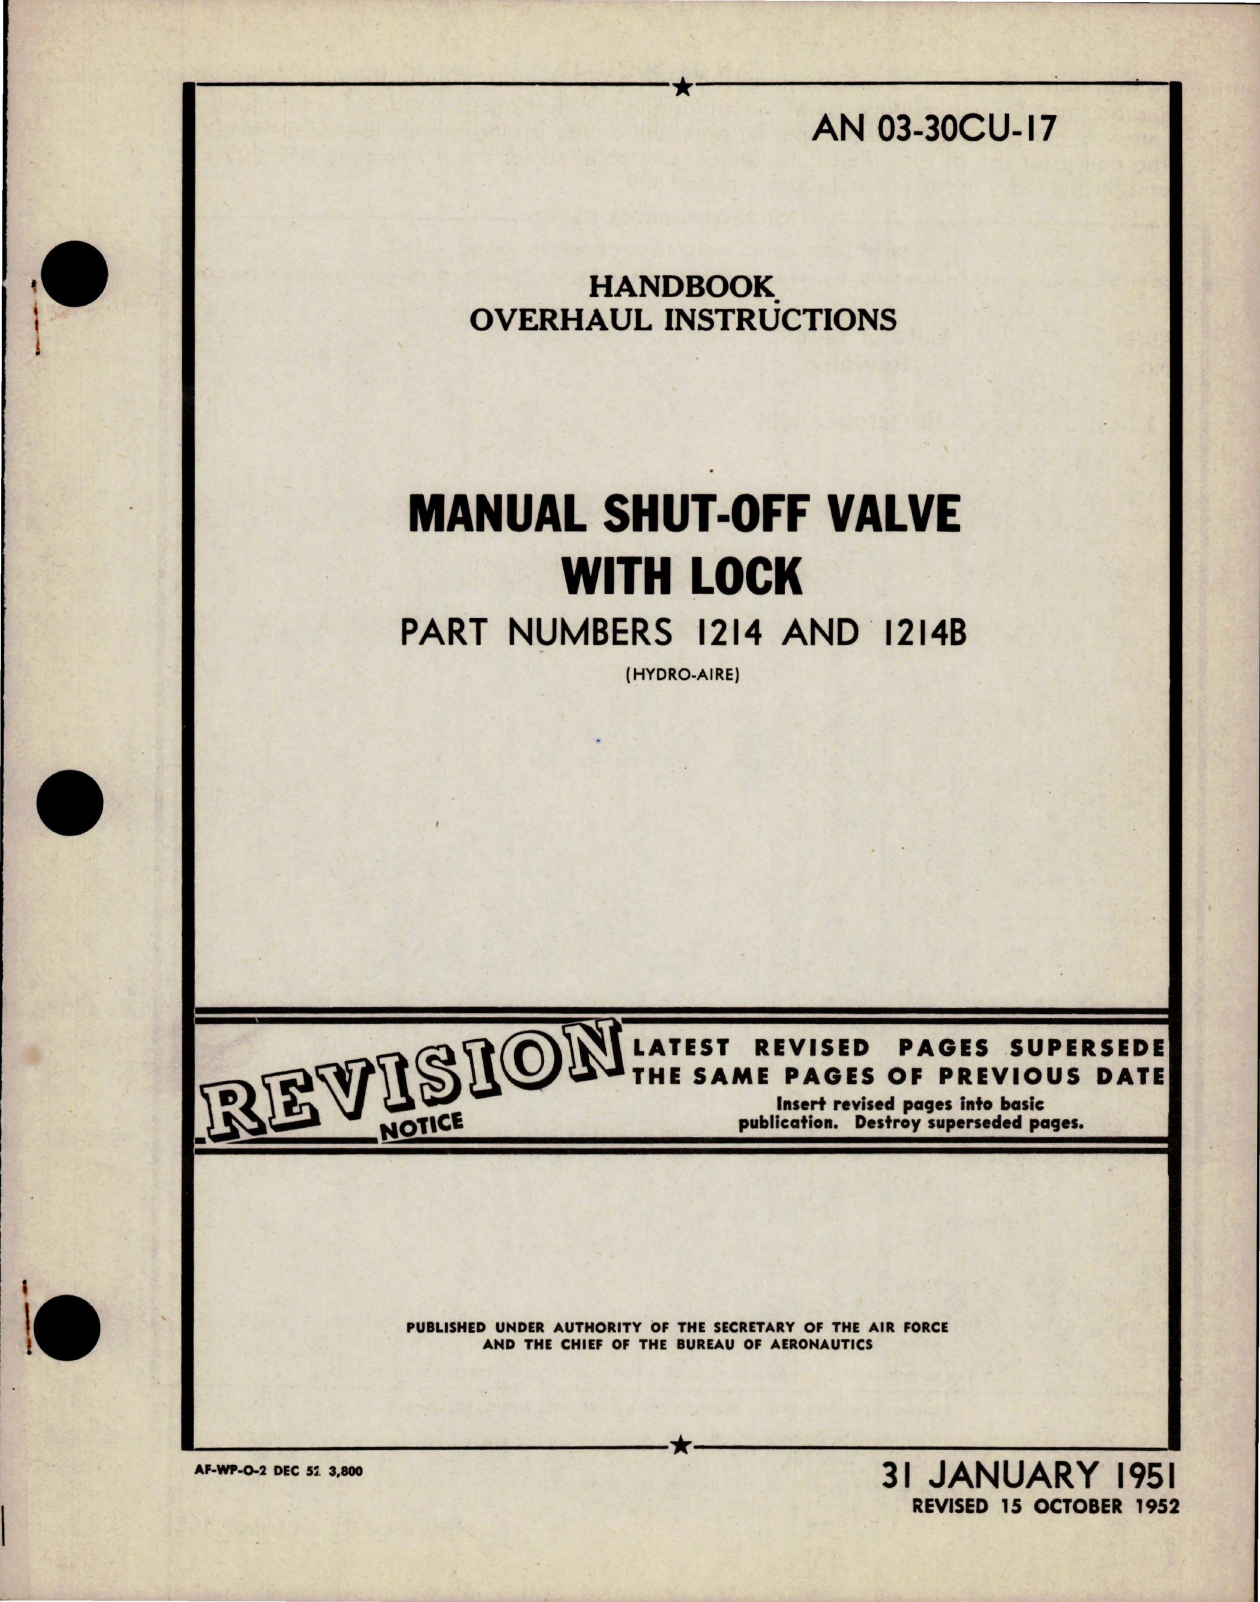 Sample page 1 from AirCorps Library document: Overhaul Instructions for Manual Shut Off Valve with Lock - Parts 1214 and 1214B